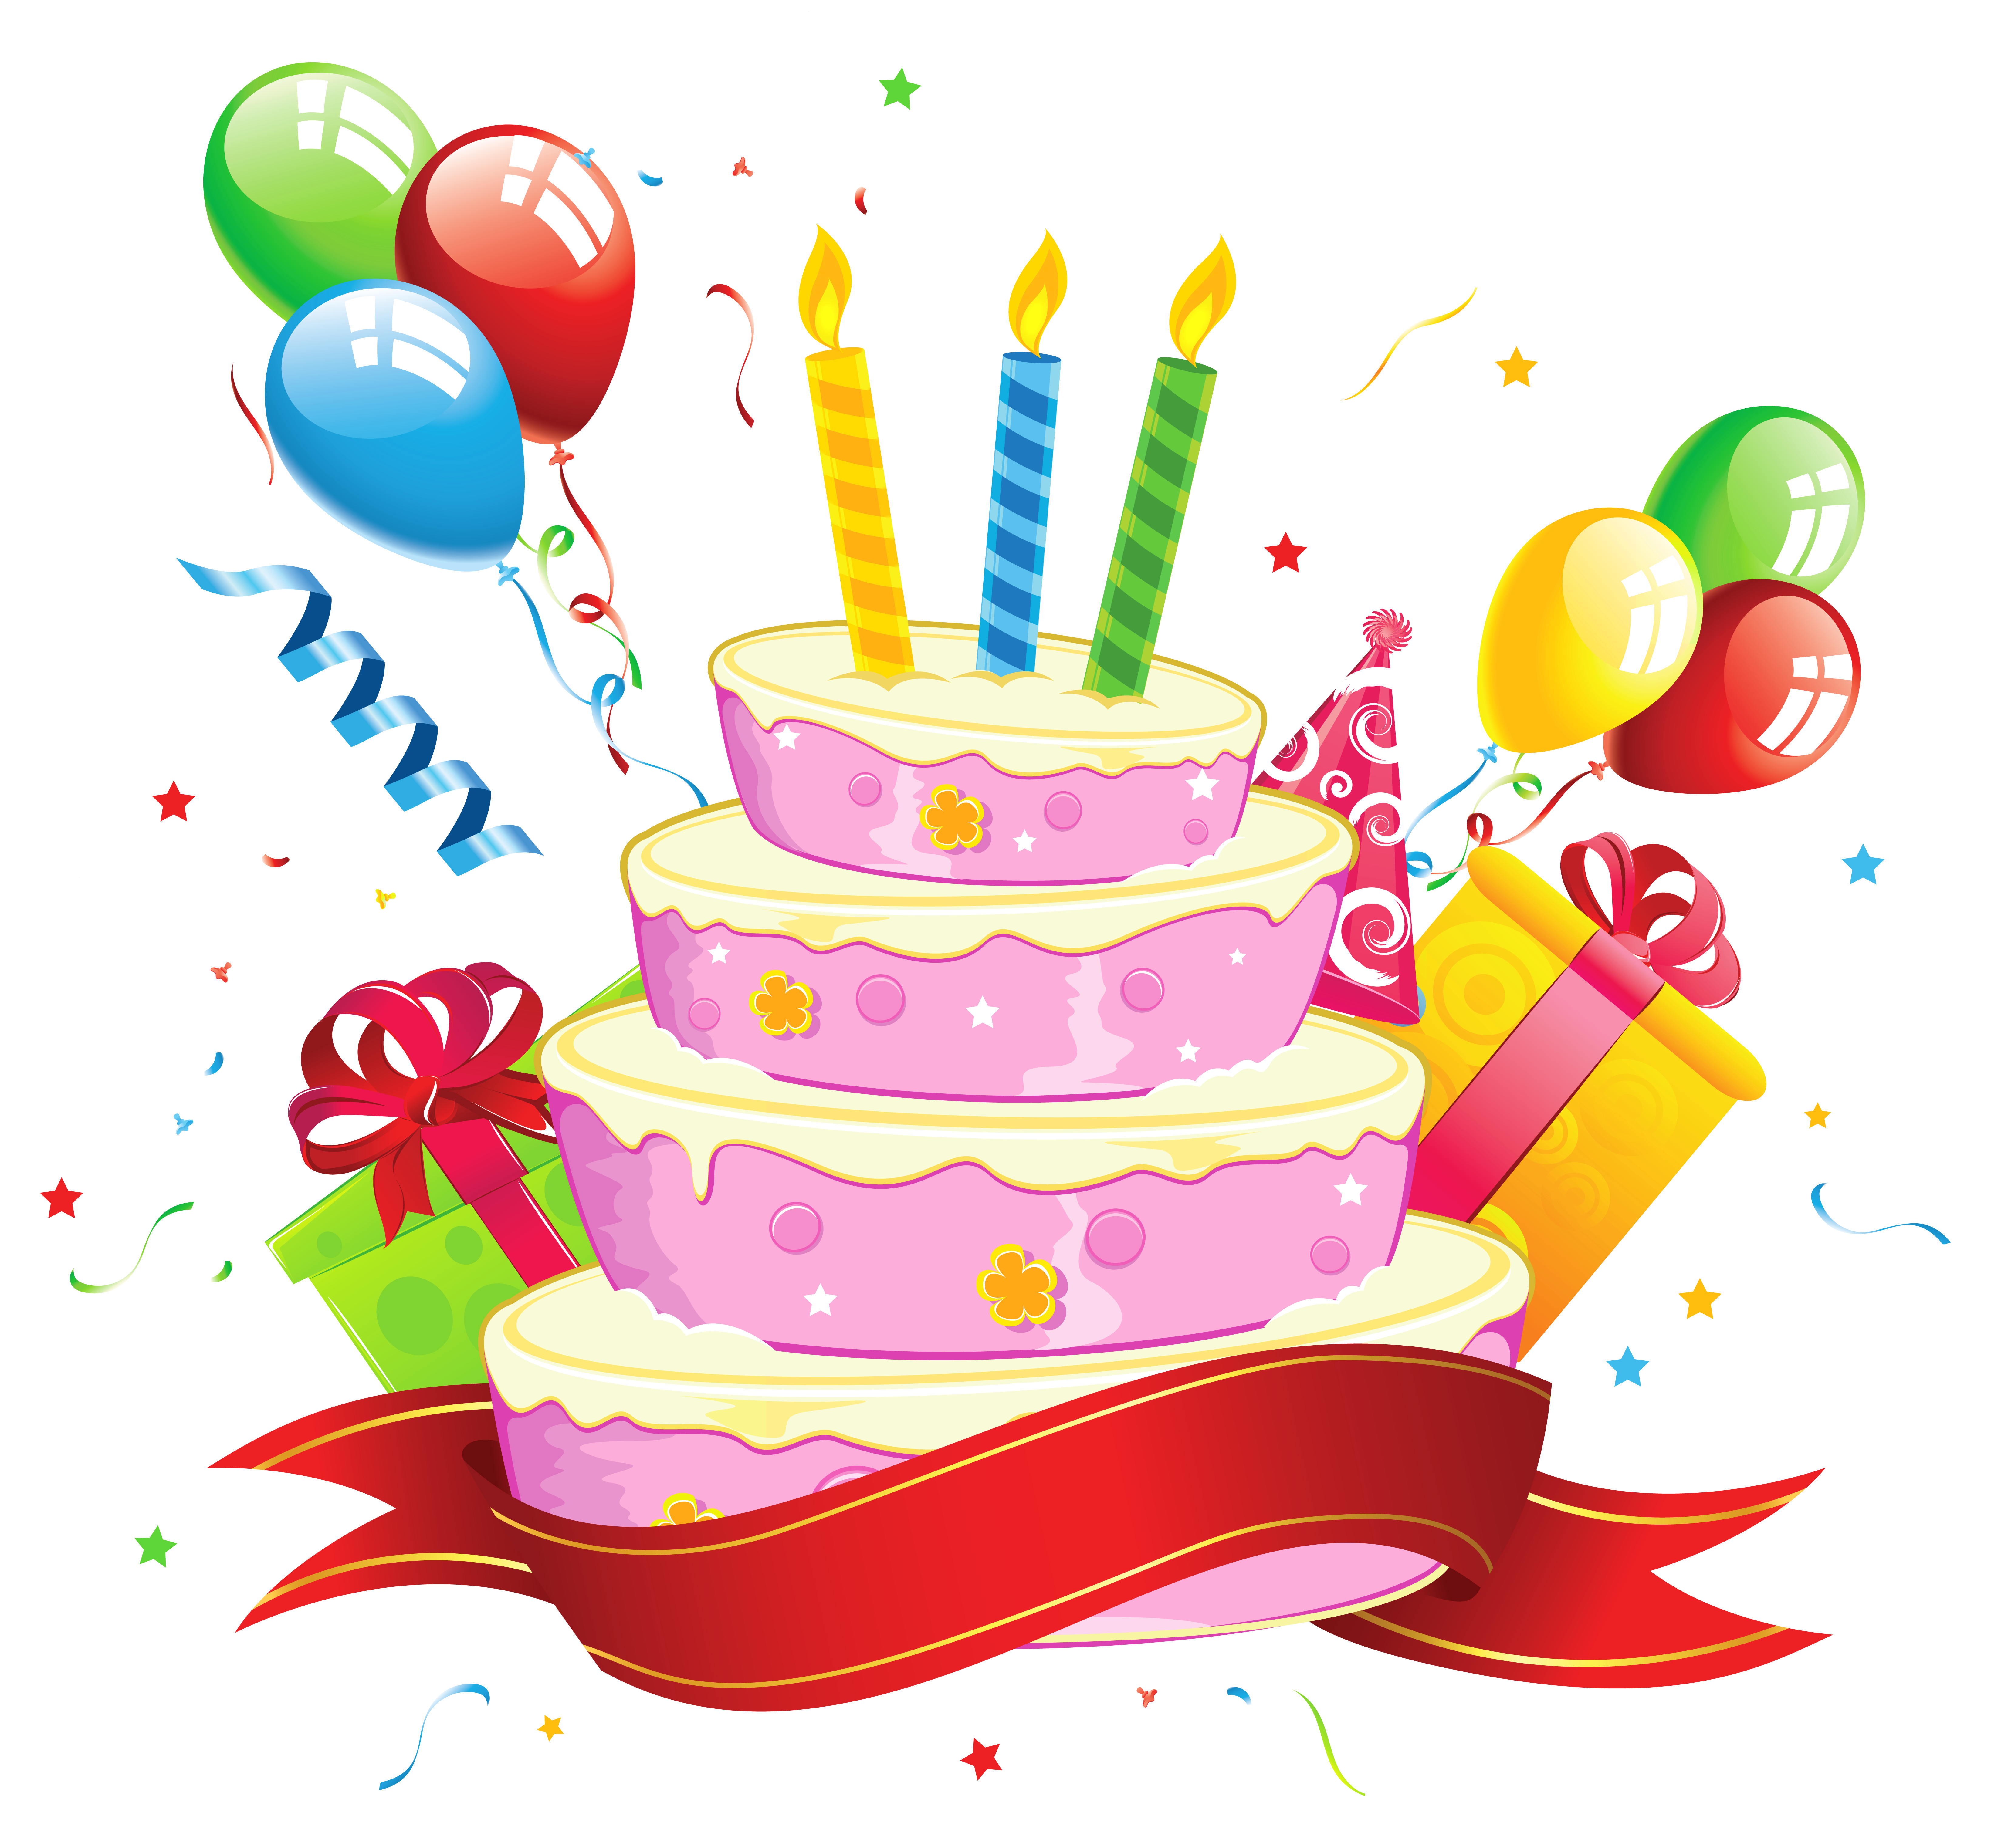 Download Free BIRTHDAY CAKE PNG transparent background and clipart